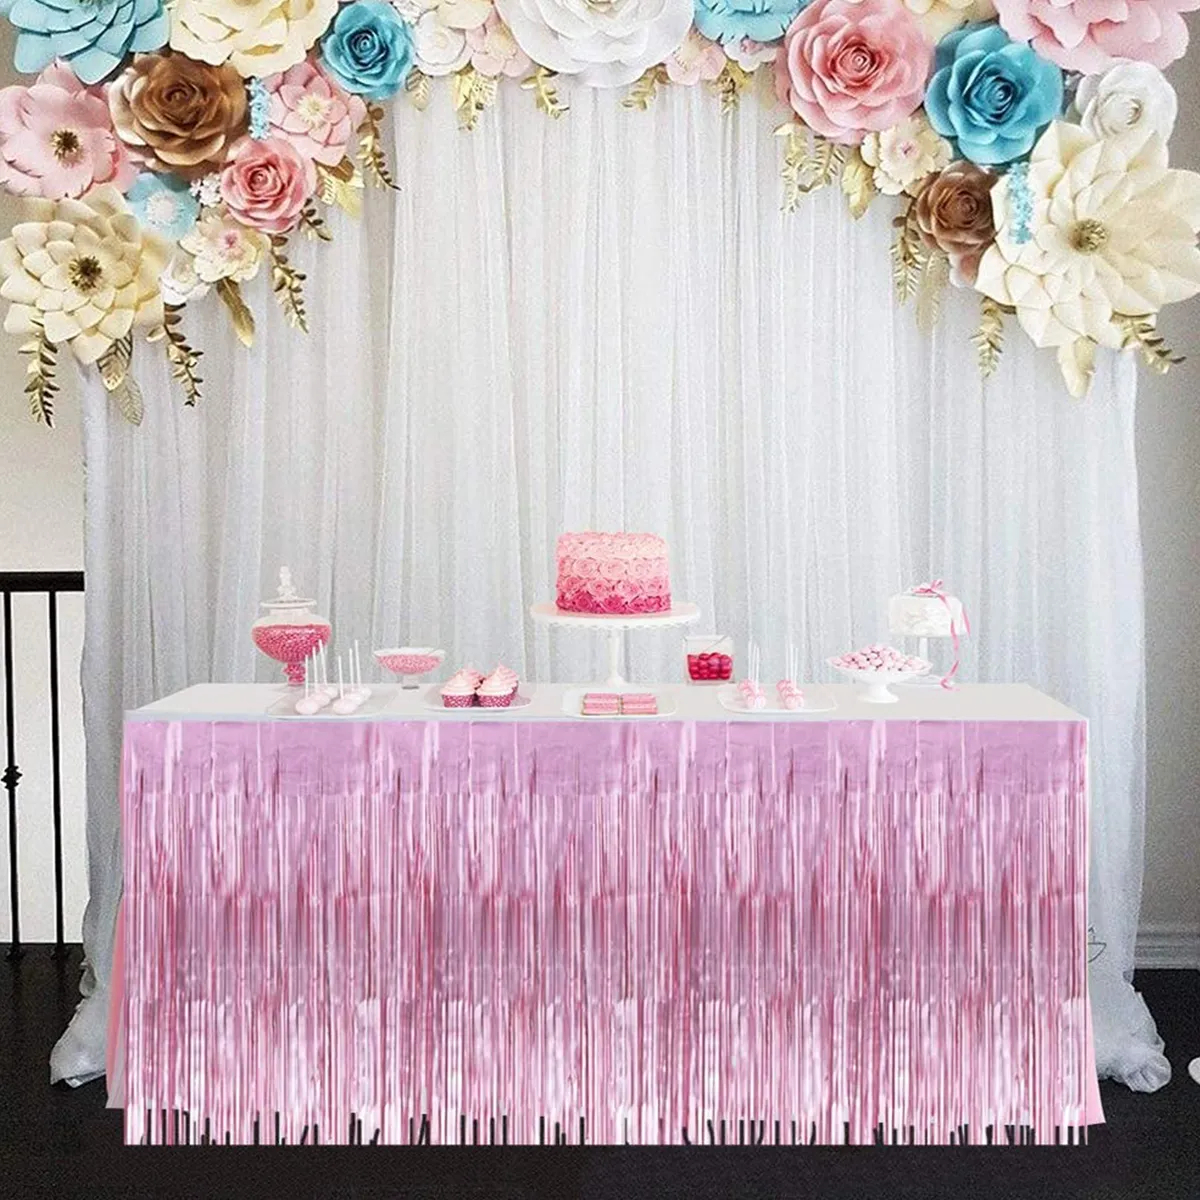 Fringe Table Skirt For Rectangle Tables Hotel Banquet Parade Floats Mardi Gras Bridal Shower Wedding Party Decoration